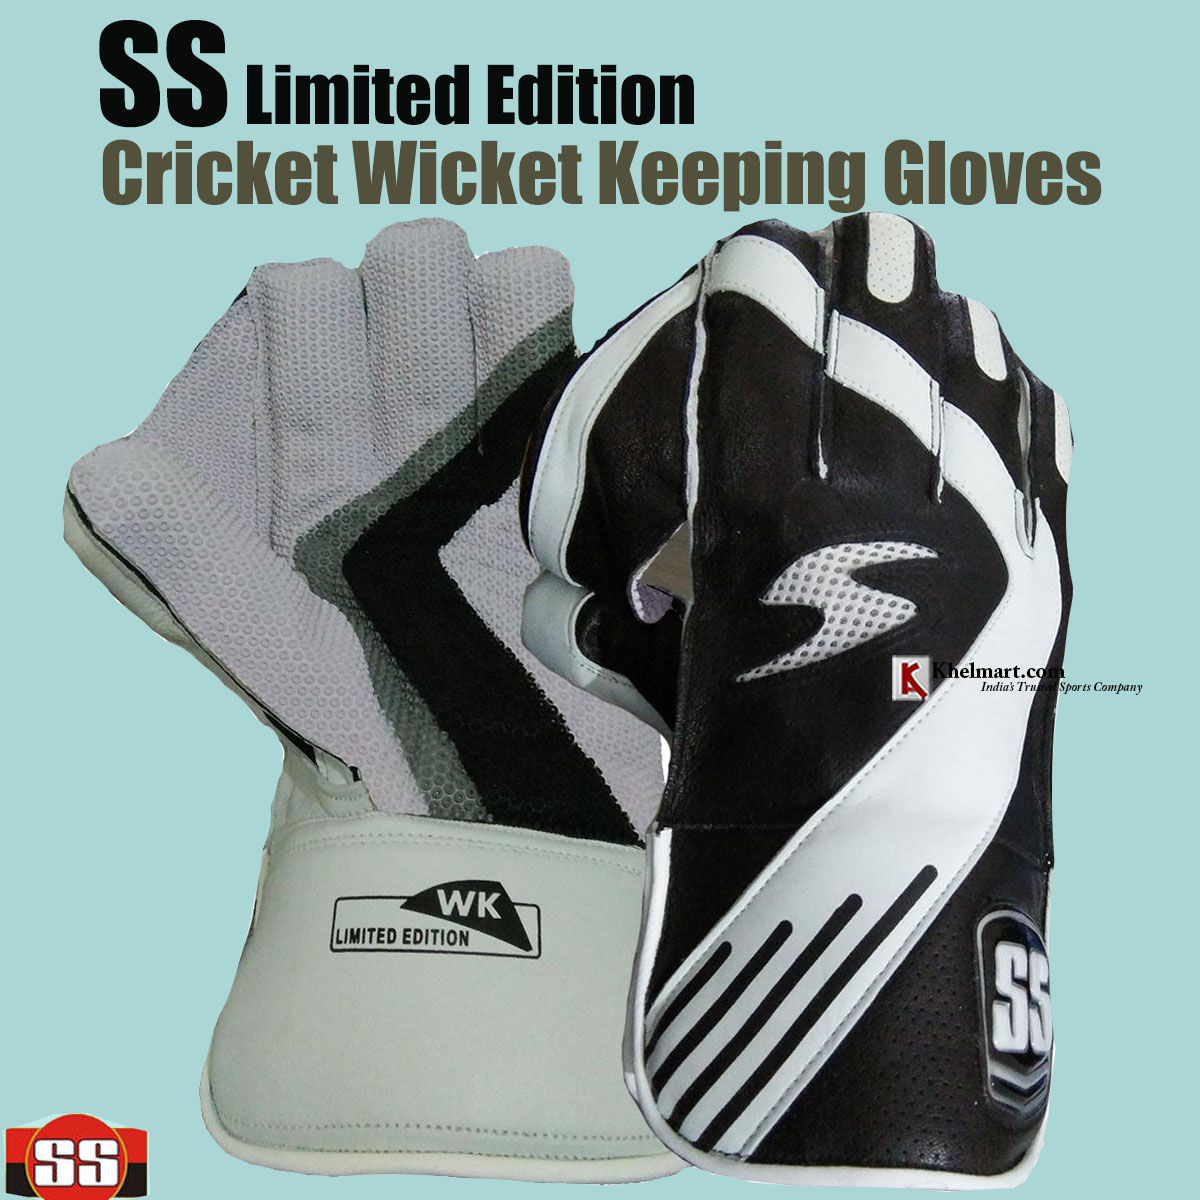 SS_Limited_Edition_Cricket_Wicket_Keeping_Gloves_2.jpg